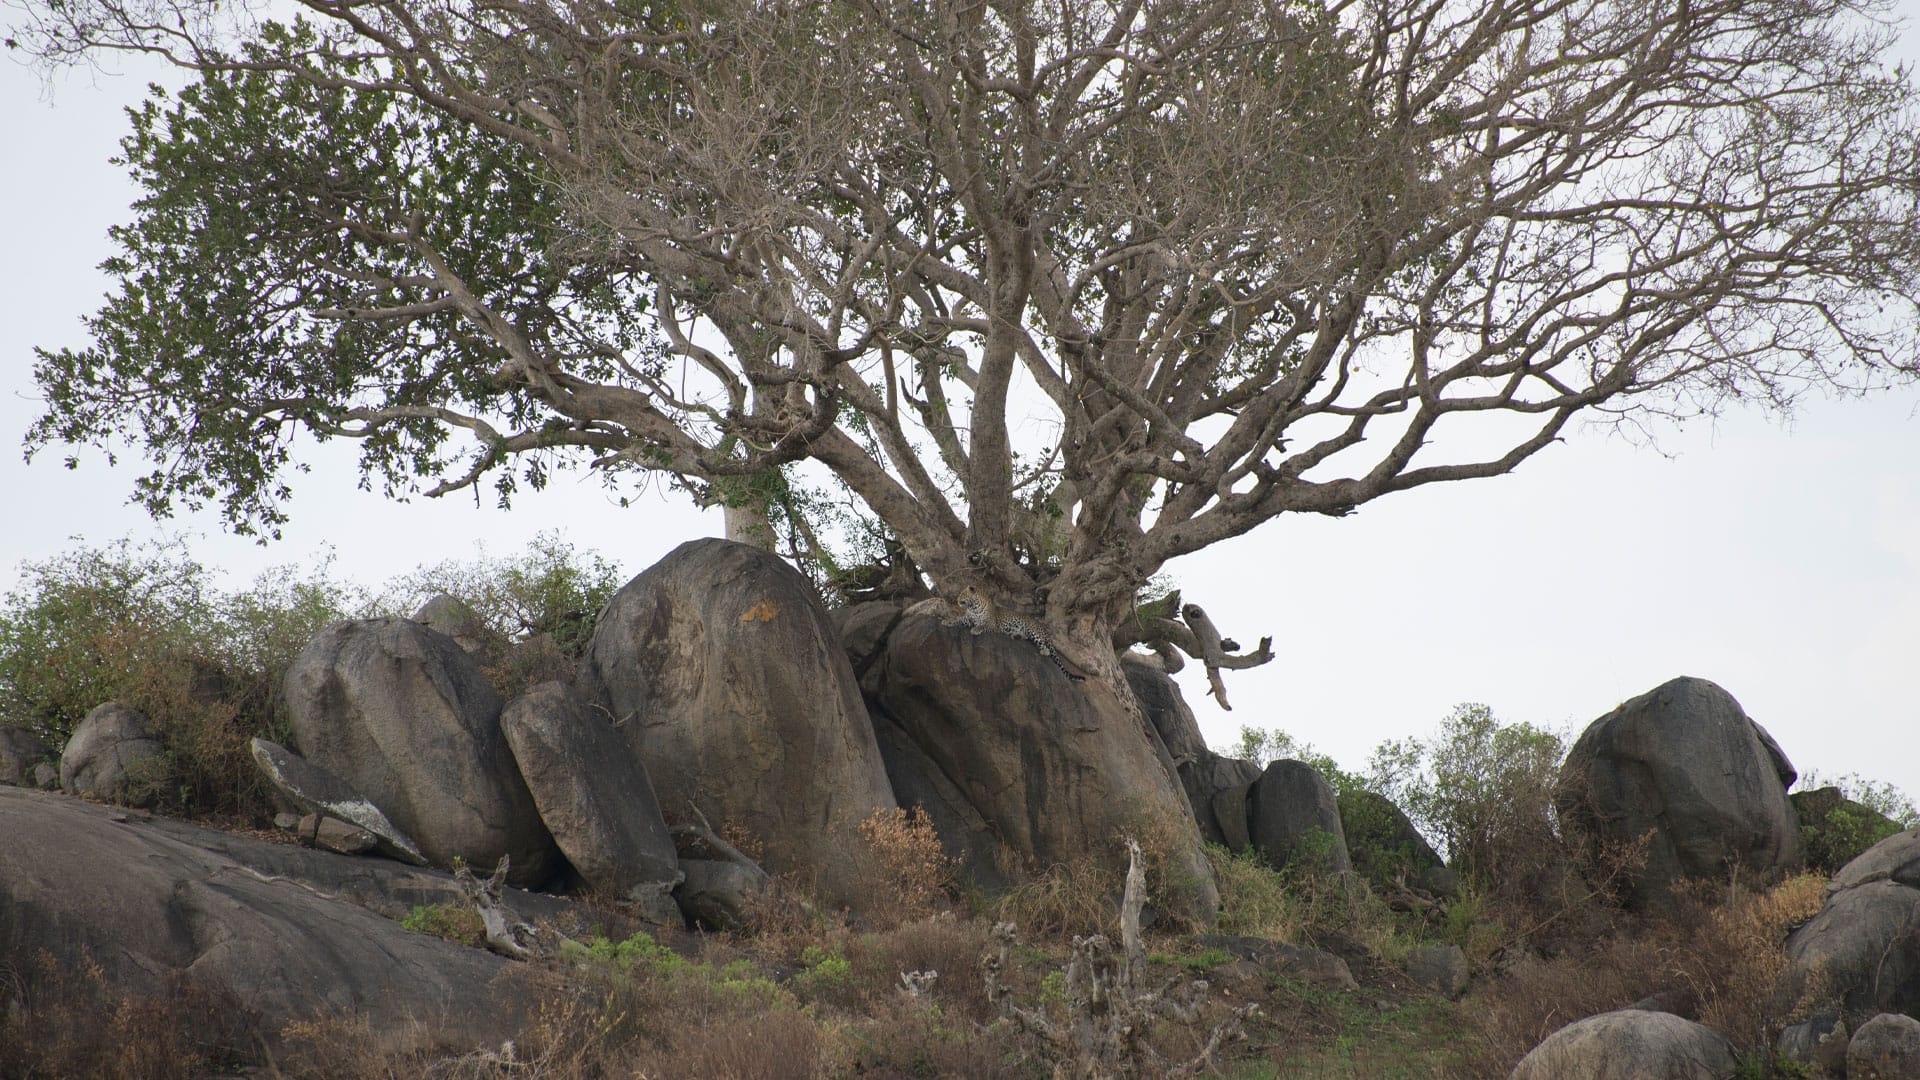 You have 20/20 vision if you can see the hidden leopard with perfect camouflage in 10 seconds in this Serengeti scene